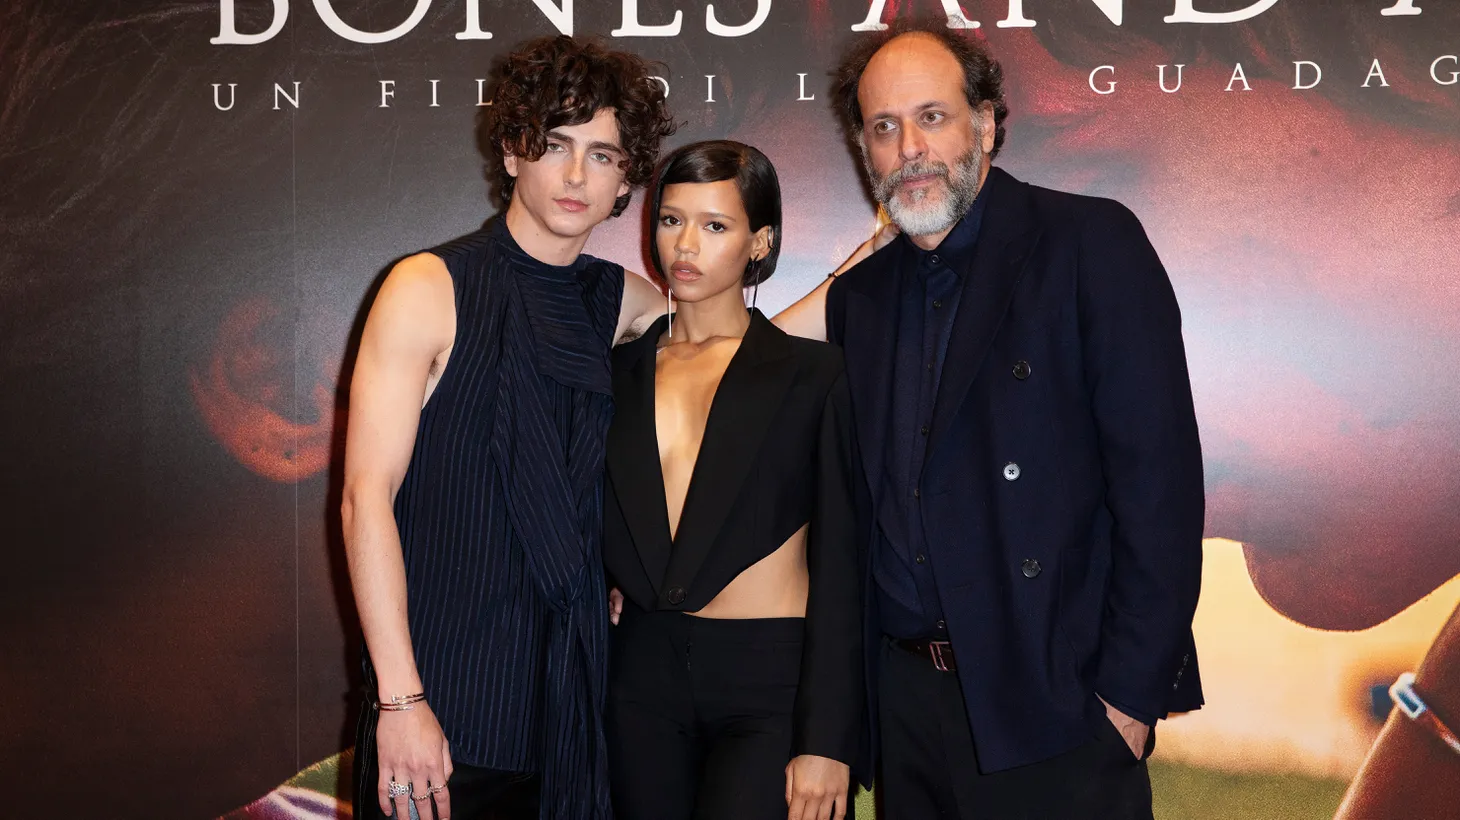 “Hopefully people will overcome their reflexes and they will understand the good intentions of this fable, and agree that we're not really looking for shock value, we are looking for a visceral, dark, but yet super affecting, love story,” says director Luca Guadagnino. Actors Timothée Chalamet, Taylor Russell and Guadagnino attend the photo-call for "Bones and All" in Milan, Italy, on November 12, 2022.